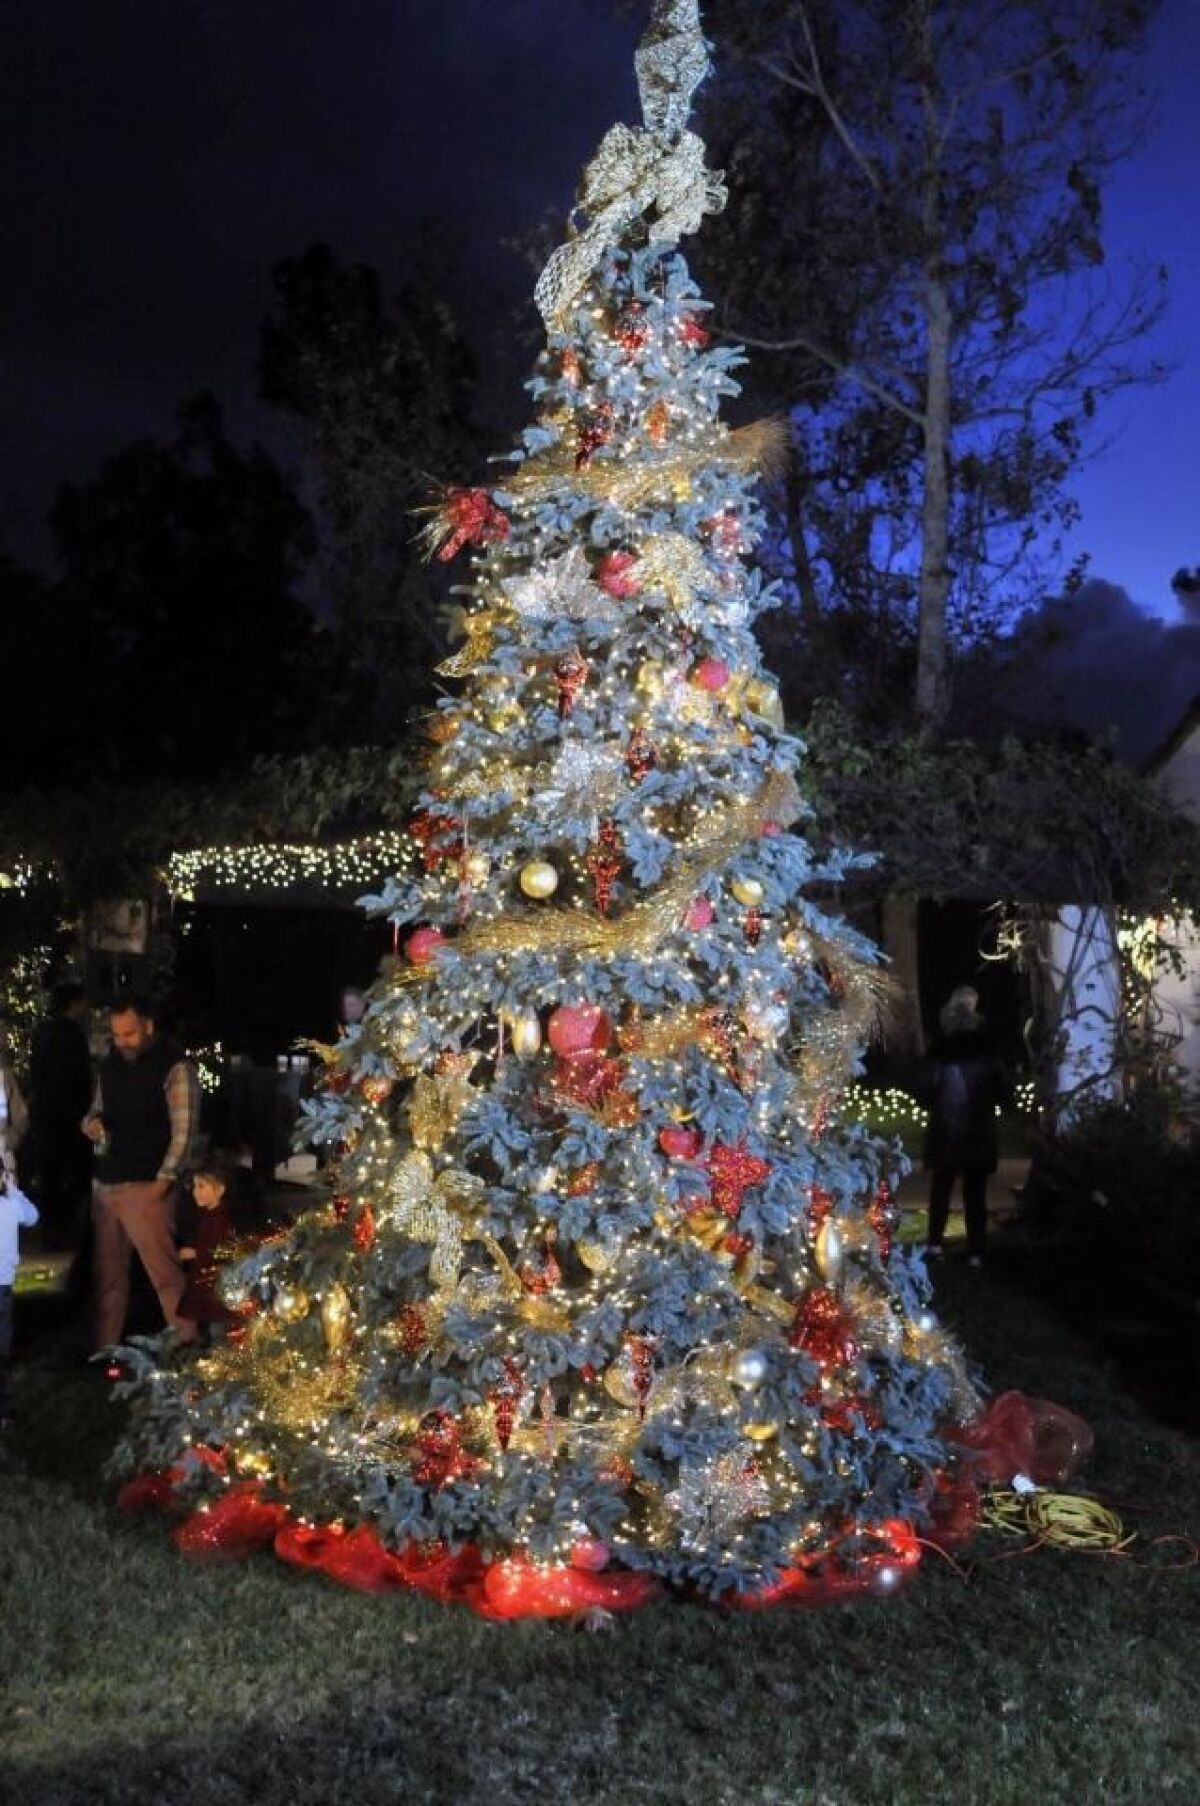 The finished tree at a previous RSF Golf Club tree lighting event.